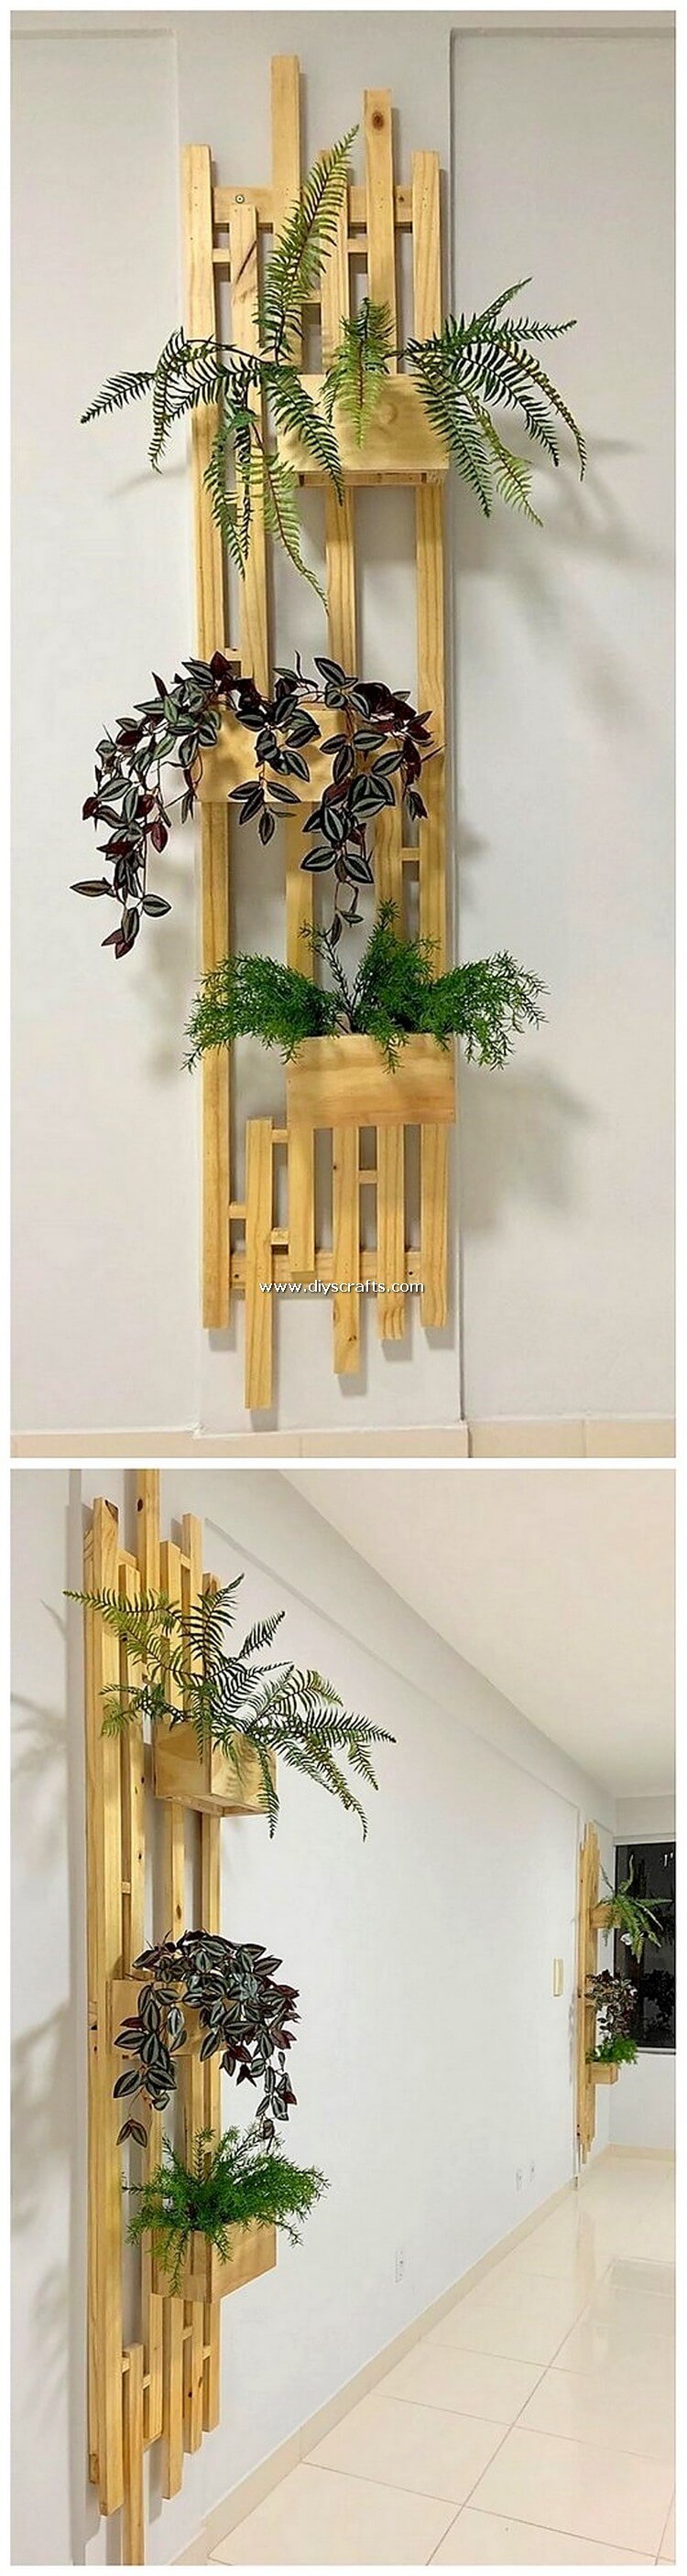 Pallet-Wood-Wall-Planter-1